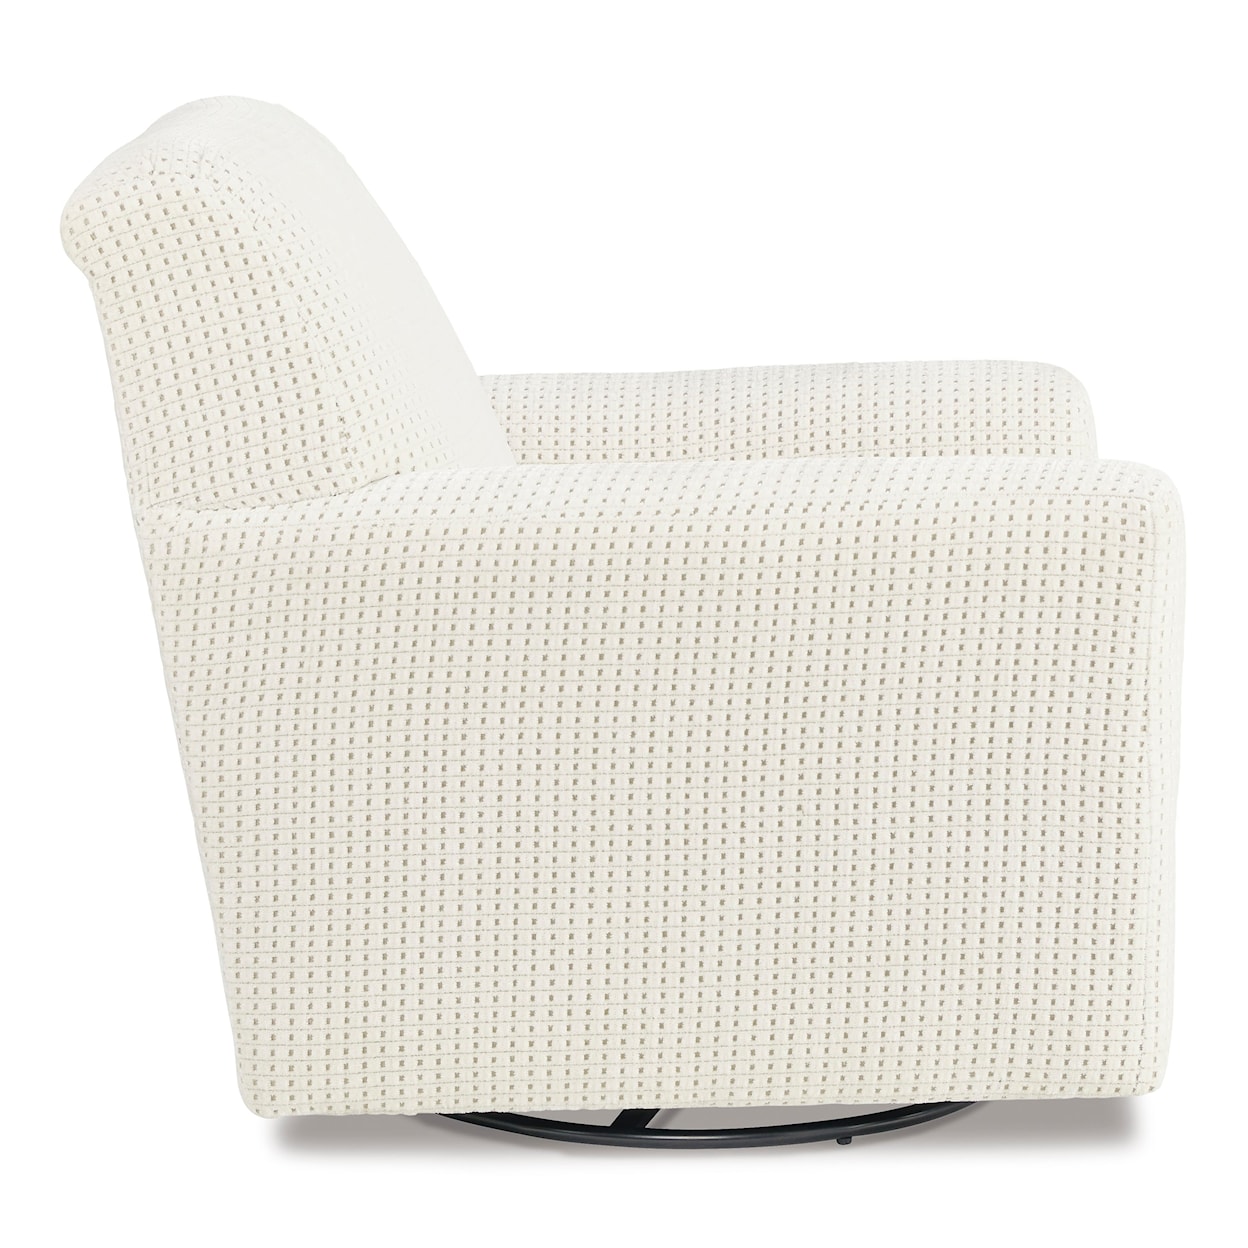 Signature Design by Ashley Herstow Swivel Glider Accent Chair